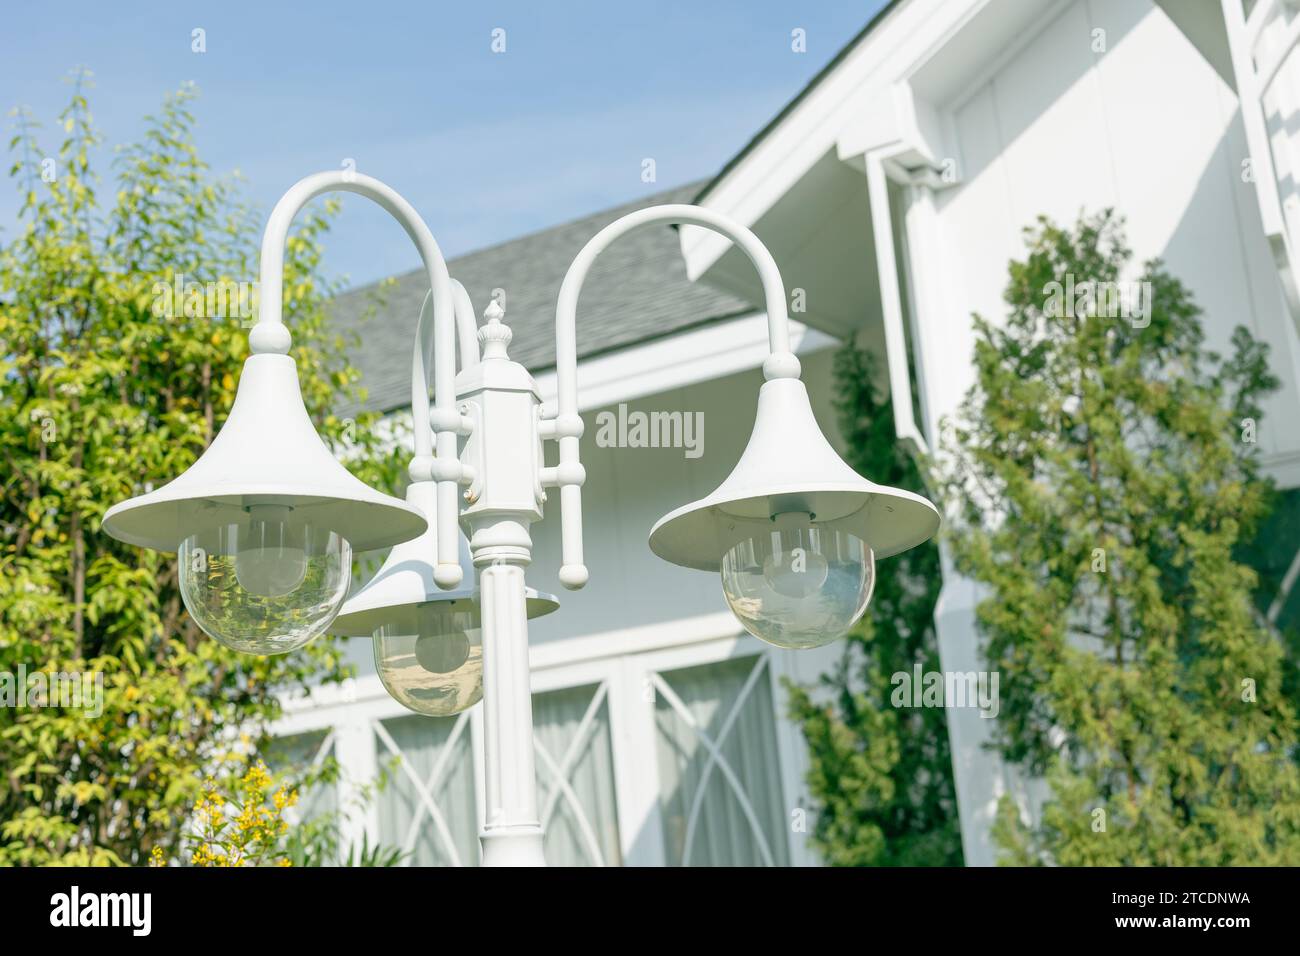 Home outdoor lighting weather proof lamps backyard garden decoration clean white art vintage style. Stock Photo